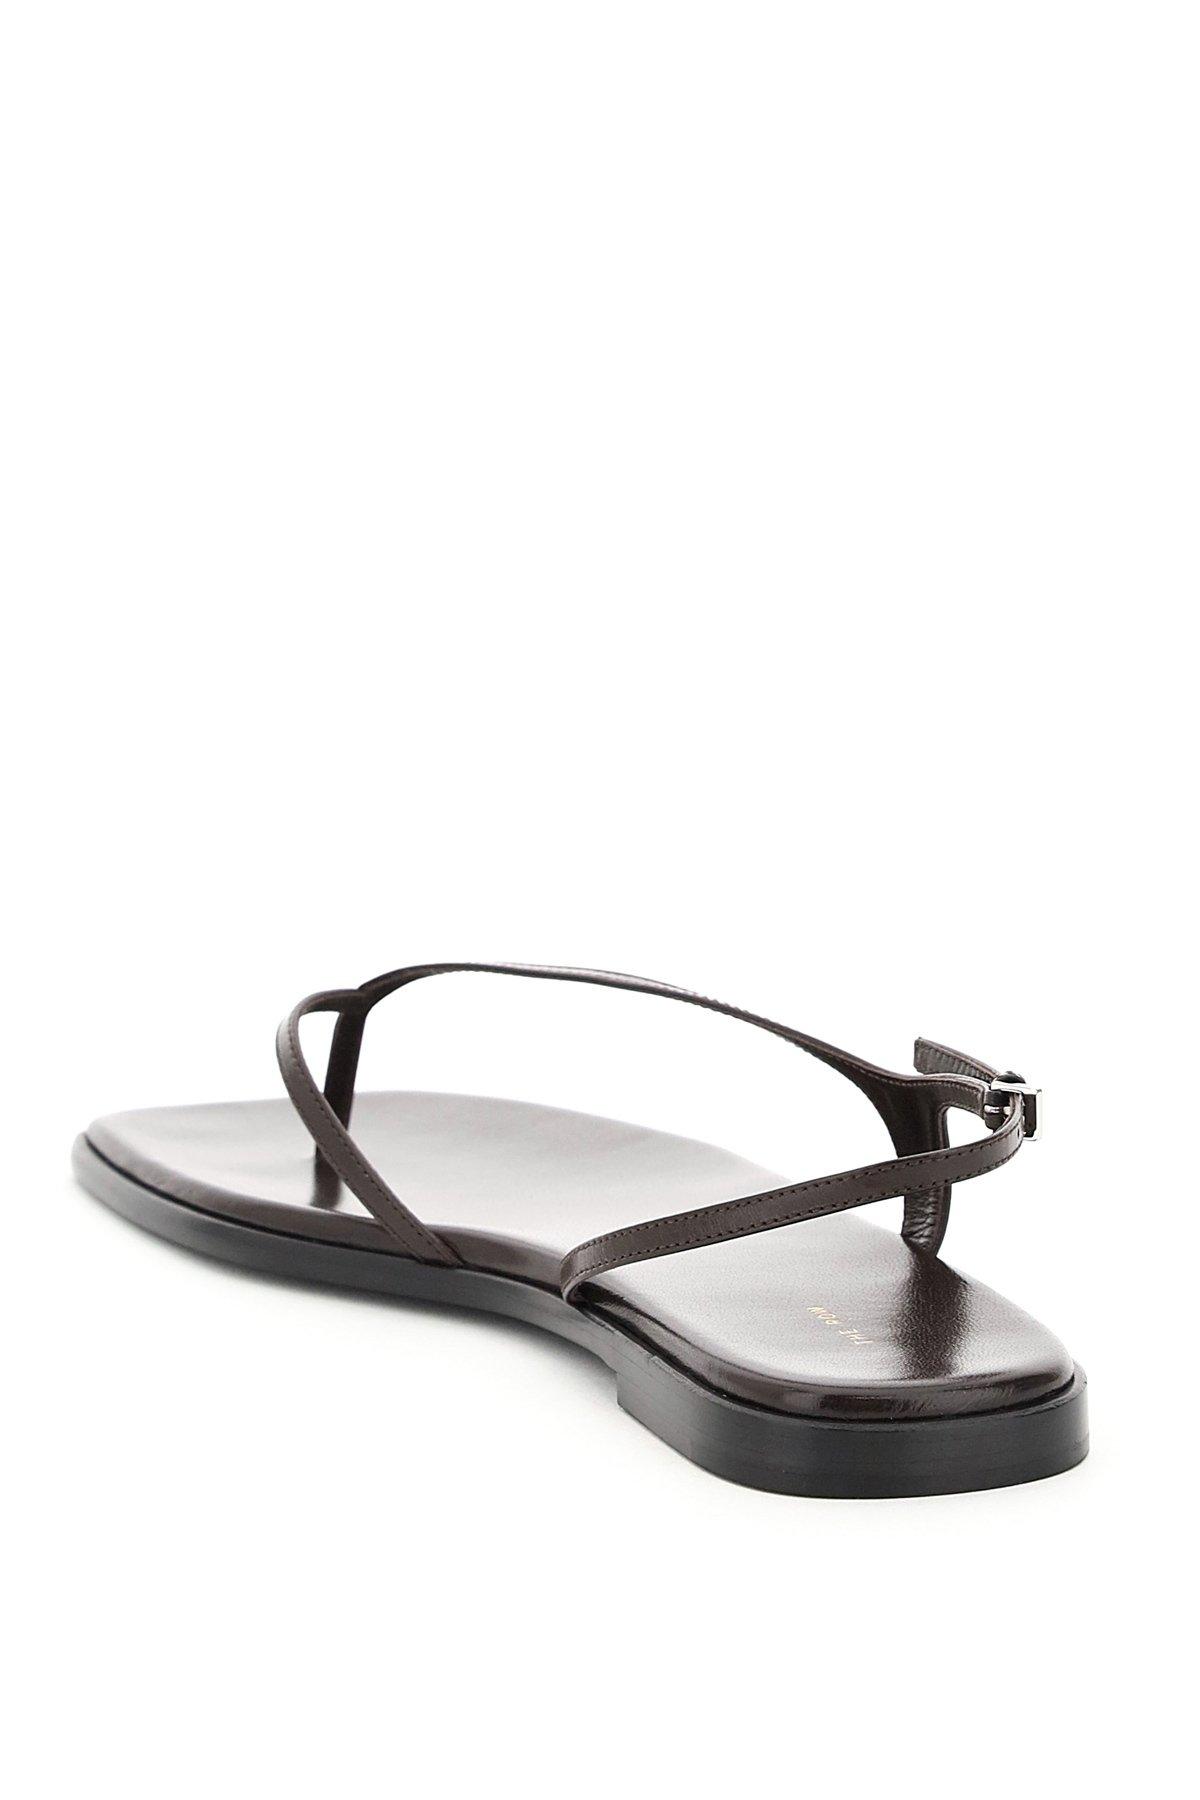 The Row Constance Flat Thong Sandals in Black | Lyst